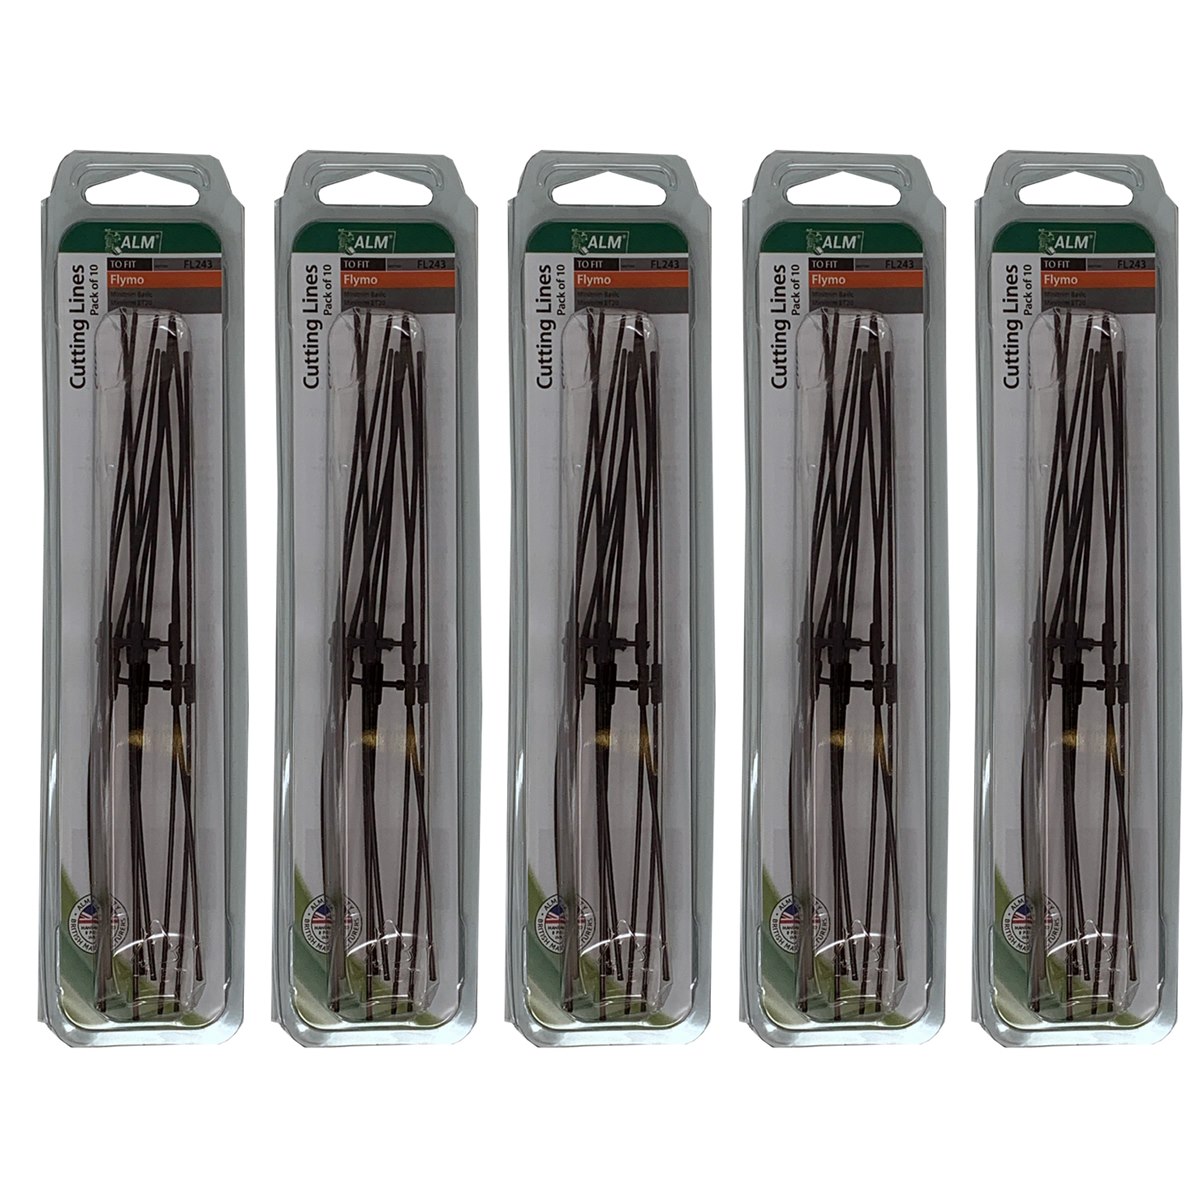 Case of 5 x ALM FL243 Cutting Lines For Flymo Minitrim Model Trimmers Pack of 10